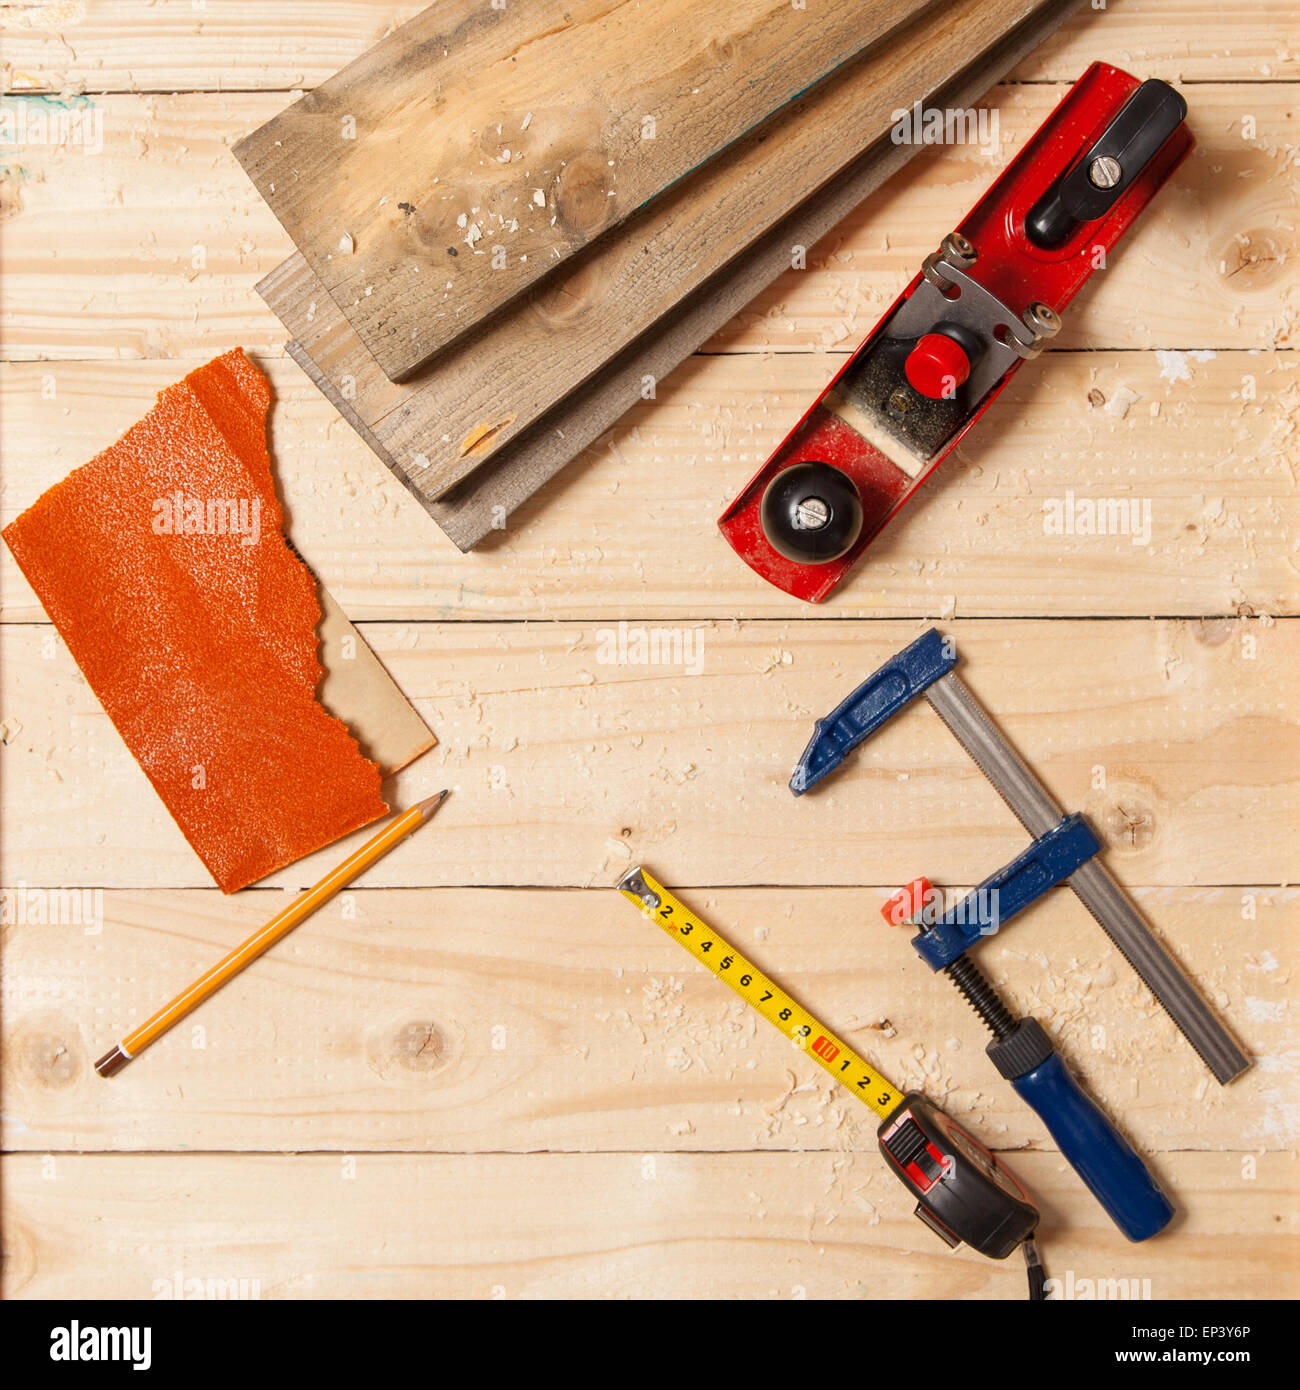 Woodworking tools on a carpenter's table Stock Photo